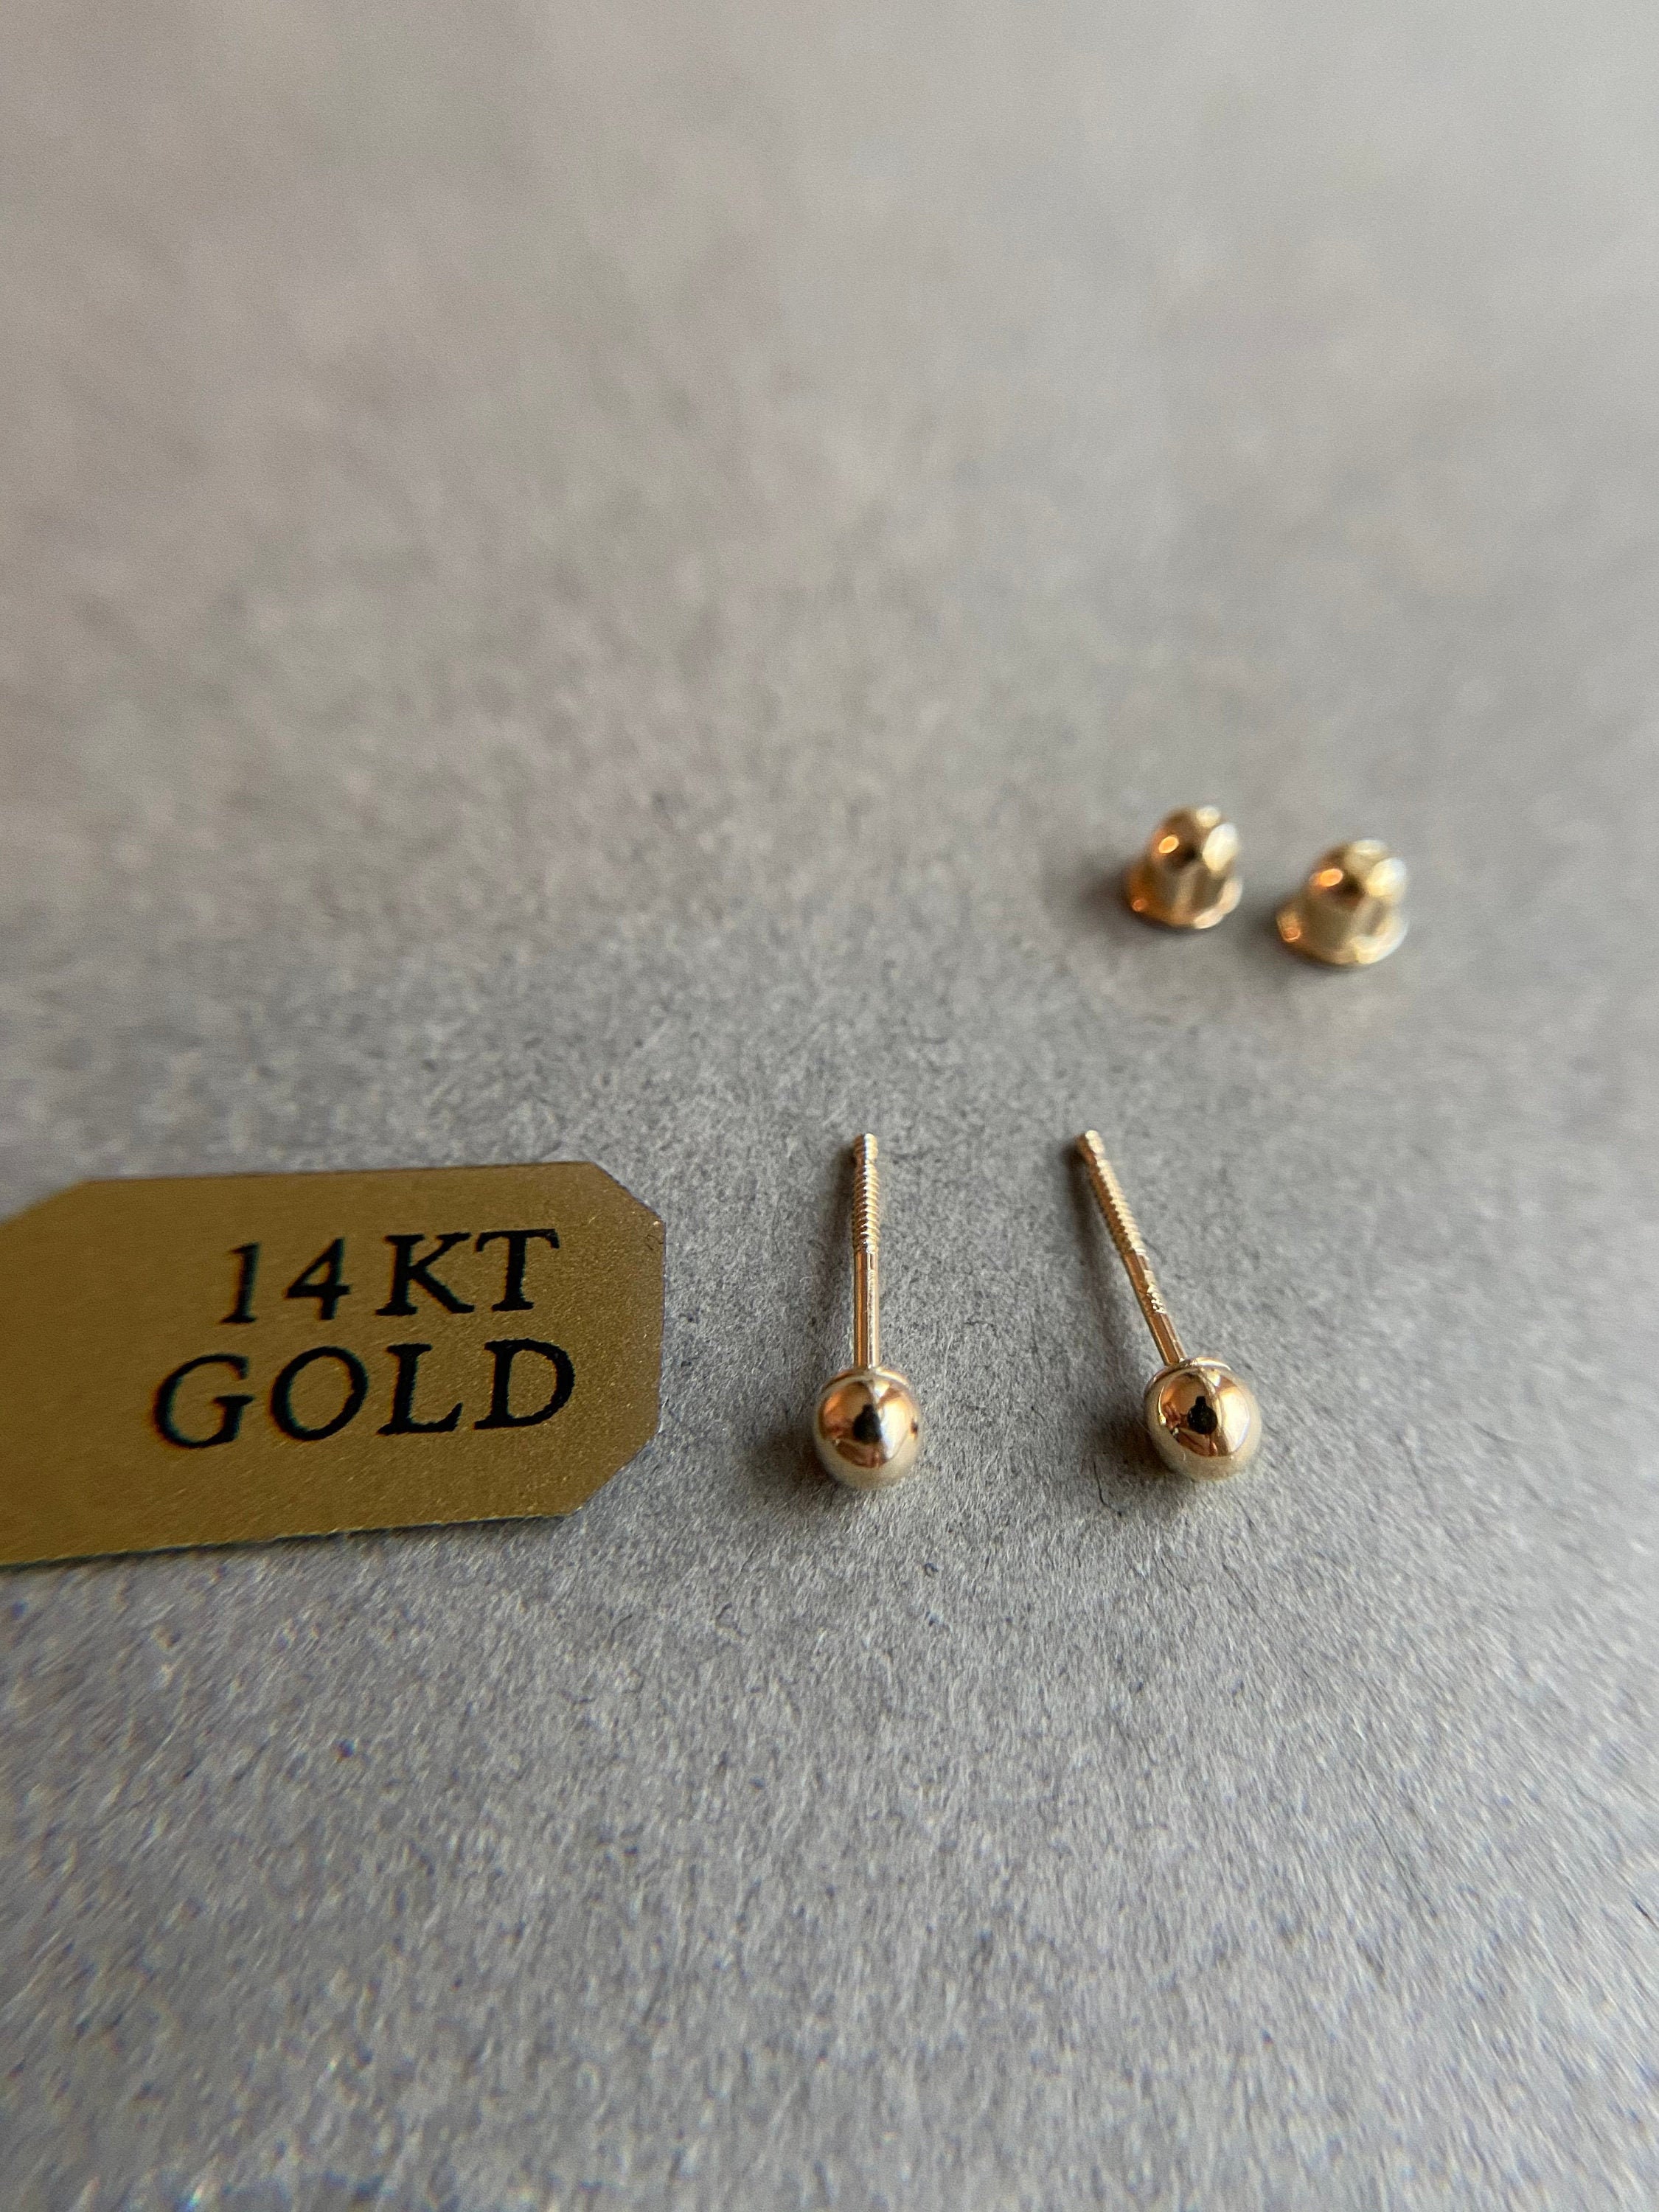 Baby or Toddler's Gold Ball Earrings, Safety Backs, 14K Yellow Gold